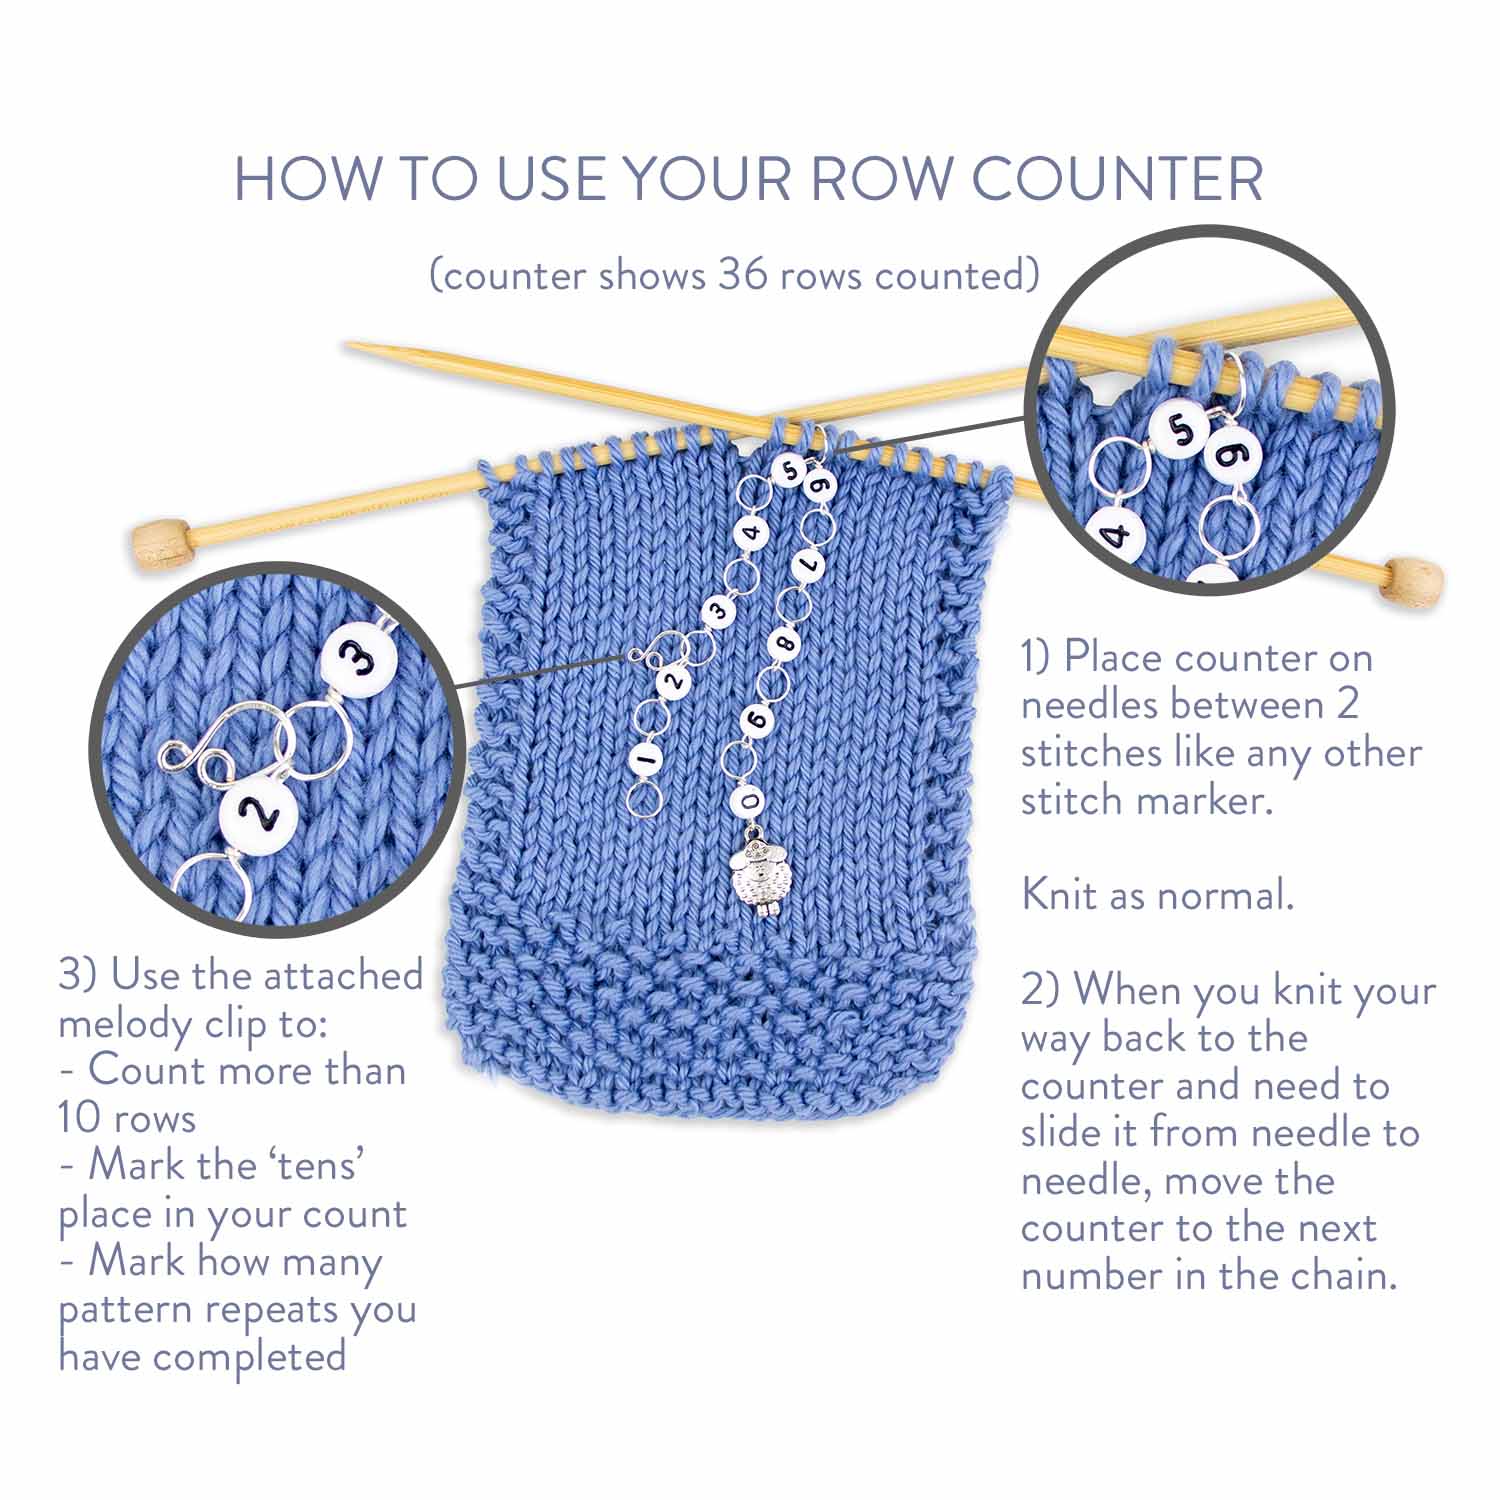 I got this row-counter in my beginner crochet kit. It does not explain how  to use it. How does this thing work? I can manually switch the numbers, but  what is the